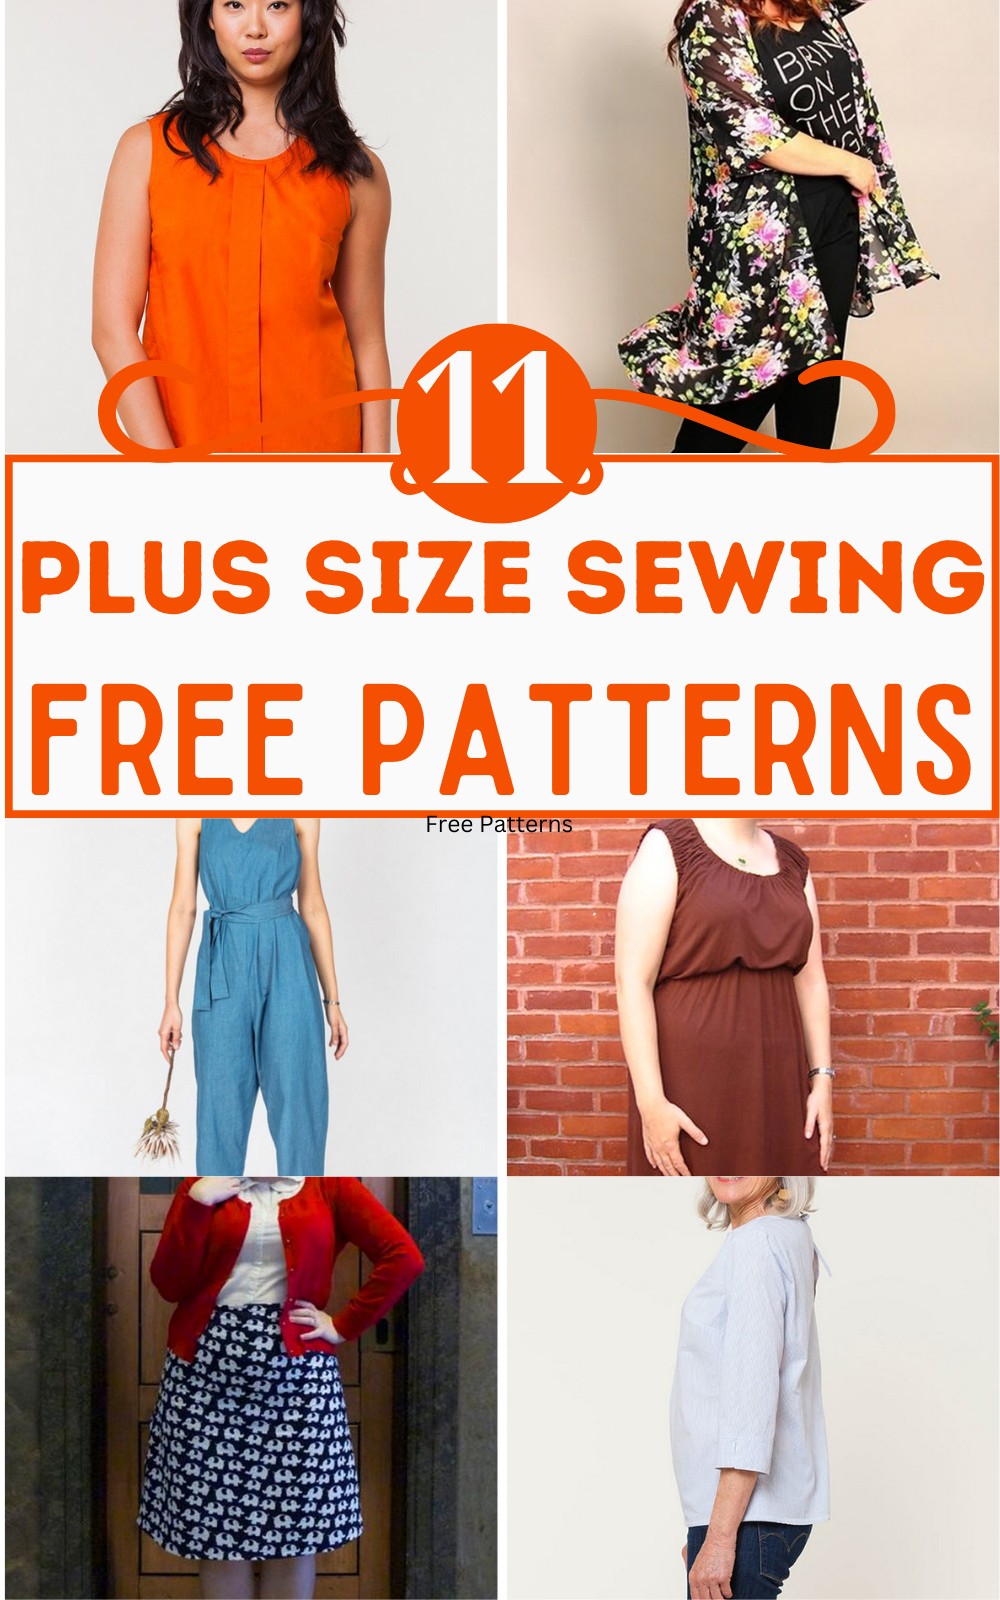 11 Free Plus Size Sewing Patterns For Women - Craftsy